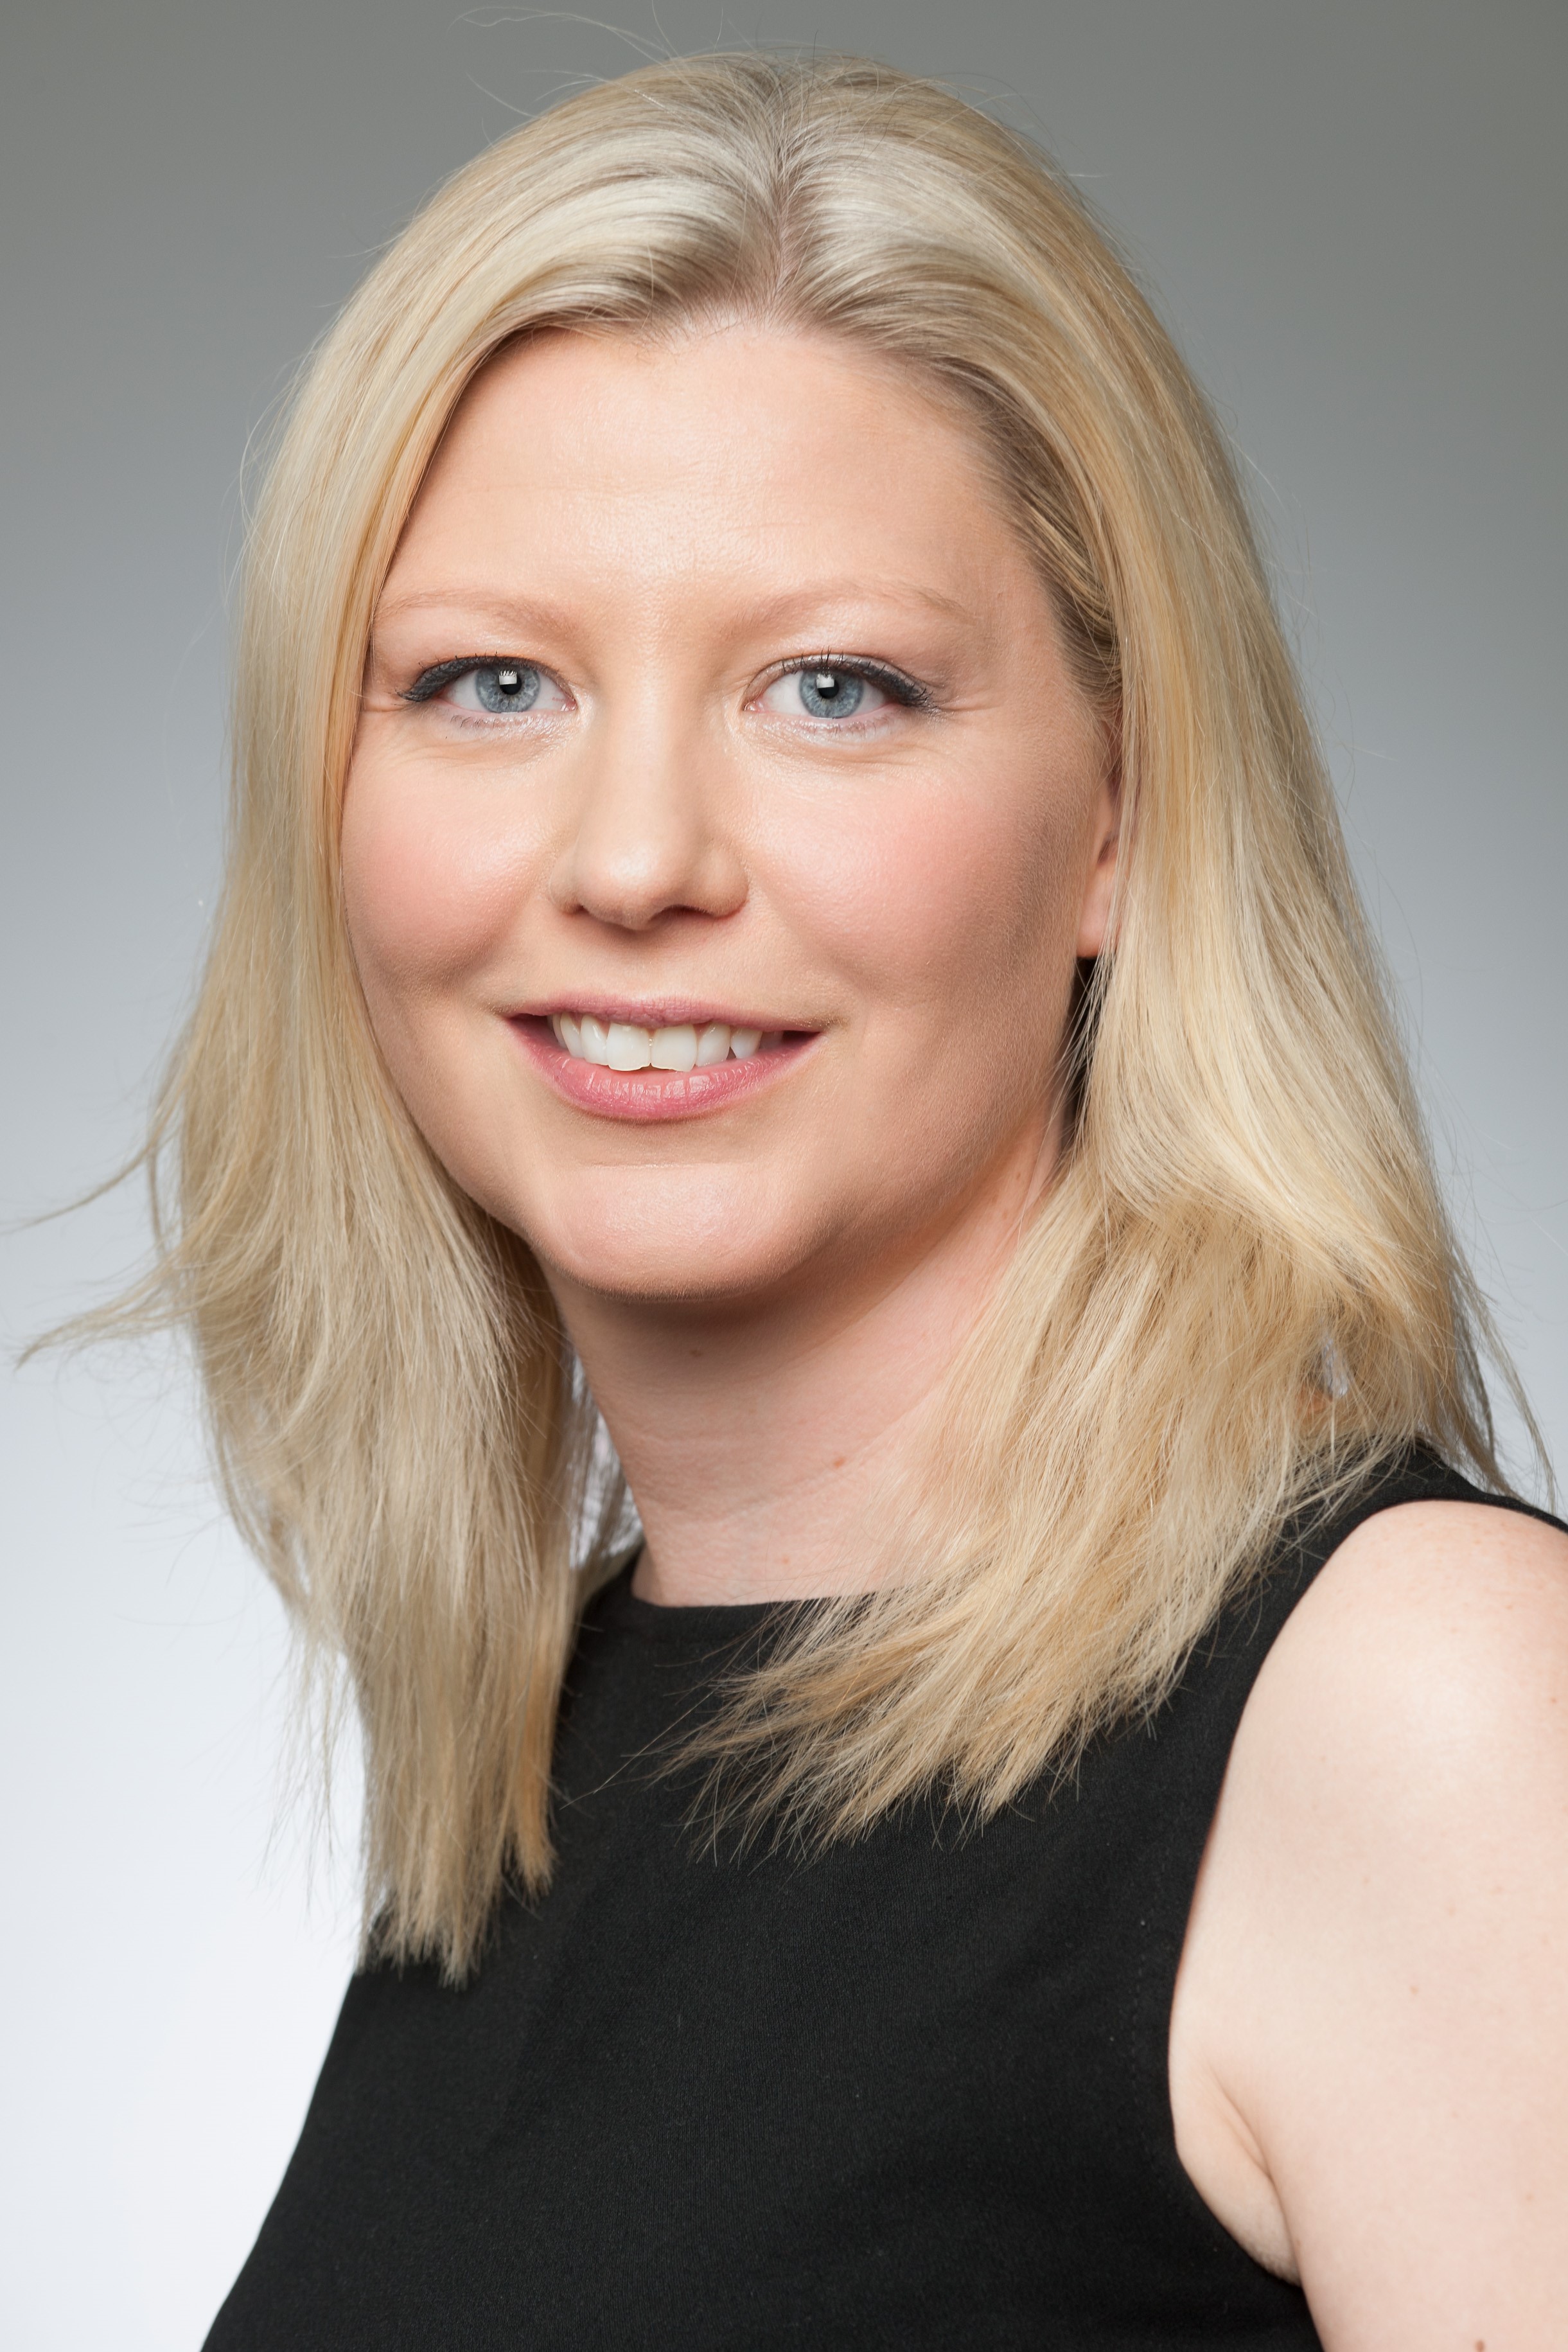 AssetCo appoints Lucy Draper as director of distribution